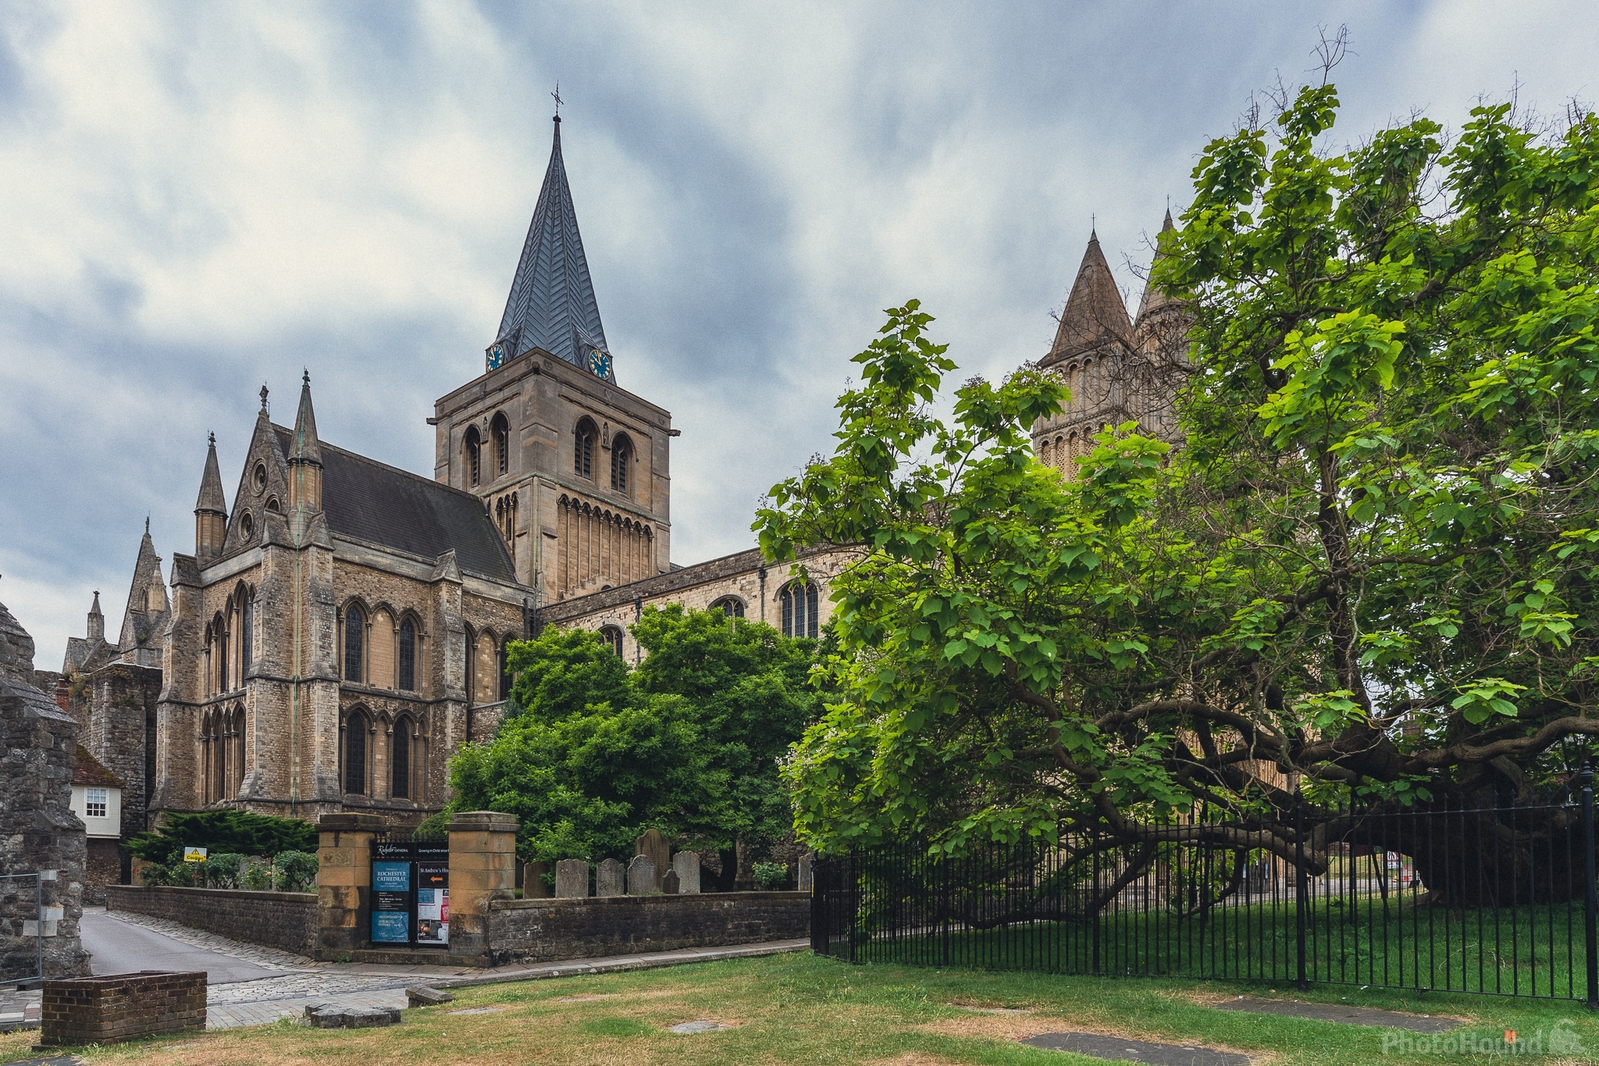 Image of Rochester Cathedral by James Billings.